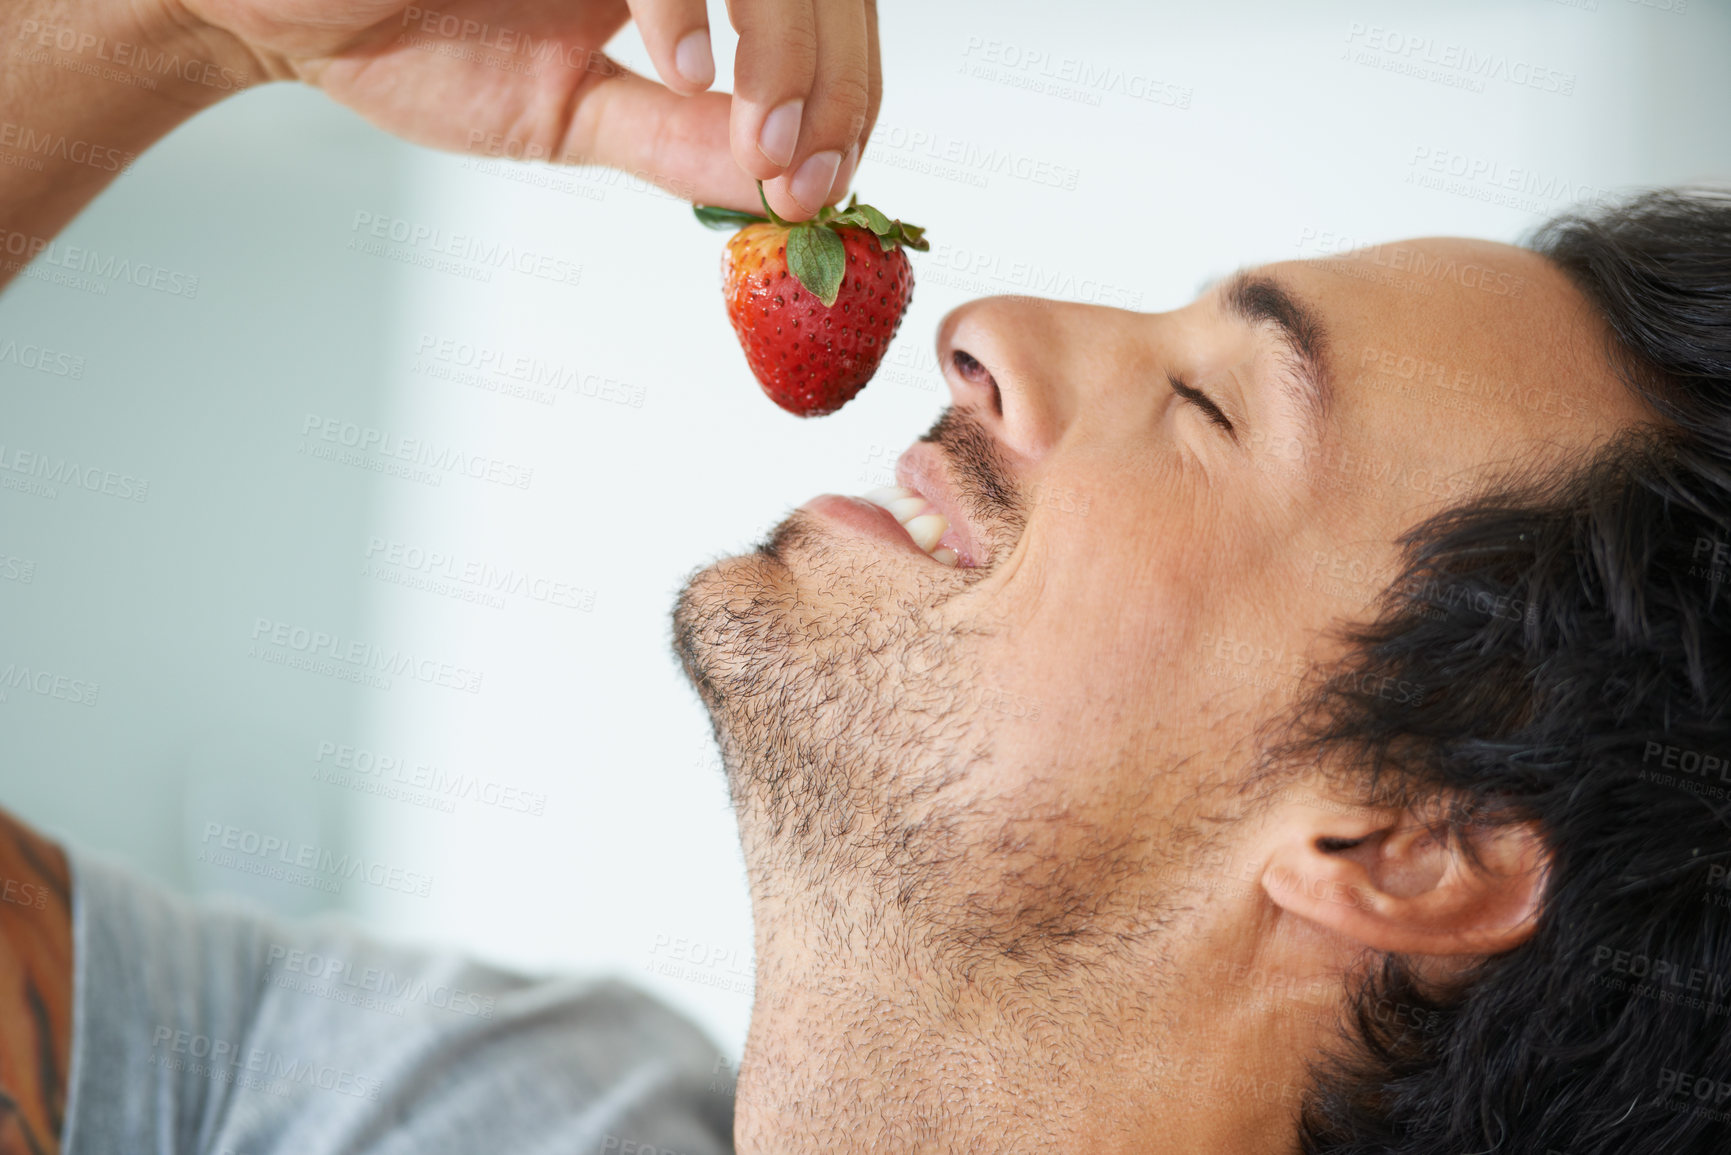 Buy stock photo Healthy food, relax man and eating strawberry for morning diet, organic vegan lifestyle or weight loss benefits, wellness or breakfast. Vitamin C, eyes closed and face of person enjoy fruit nutrition